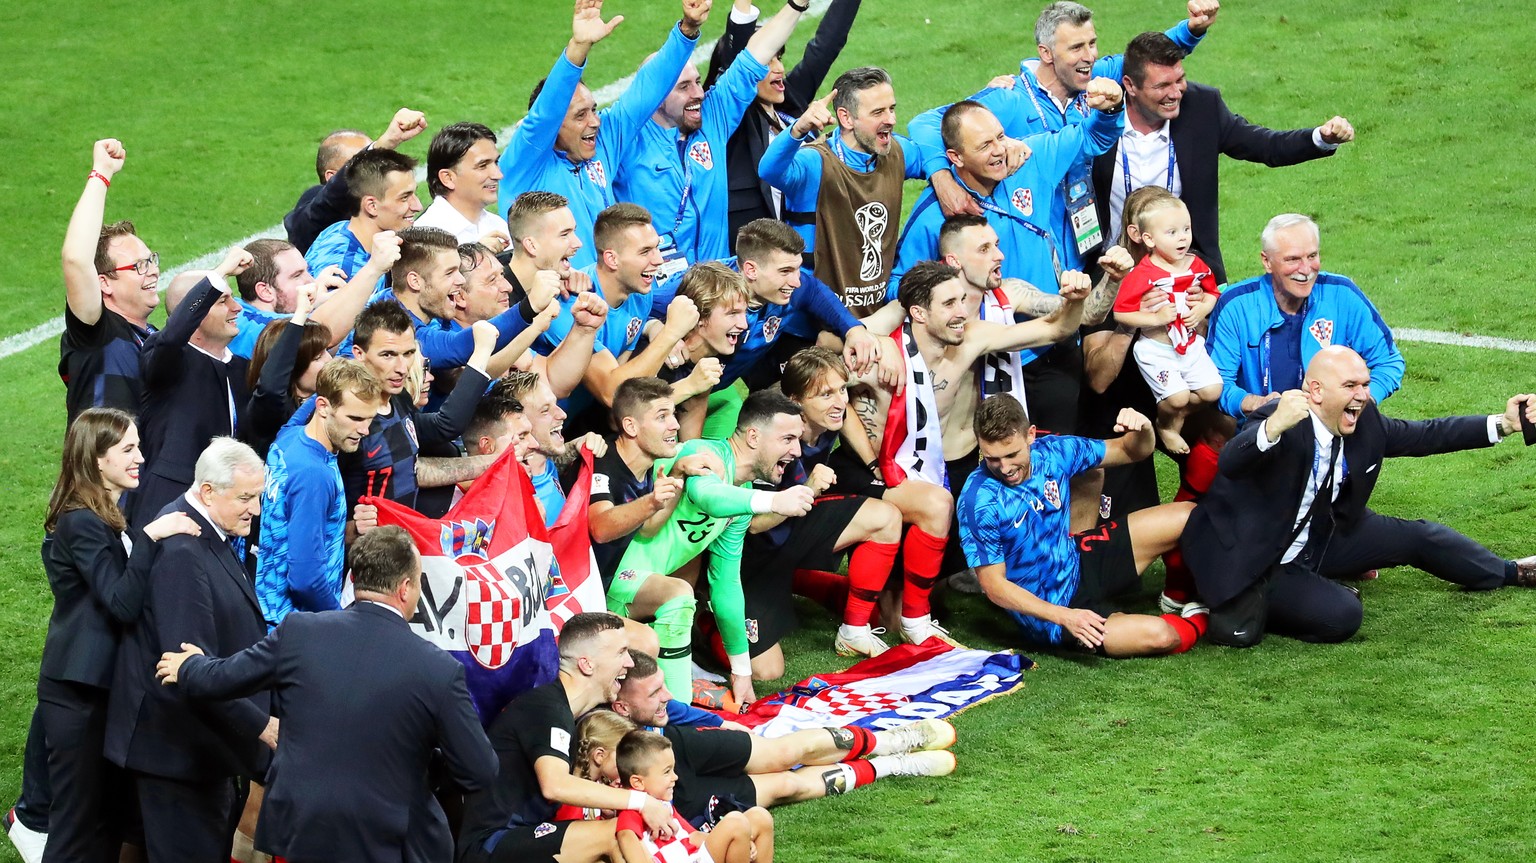 epa06882132 Players of Croatia celebrate after the FIFA World Cup 2018 semi final soccer match between Croatia and England in Moscow, Russia, 11 July 2018. Croatia won 2-1 after extra time.

(RESTRI ...